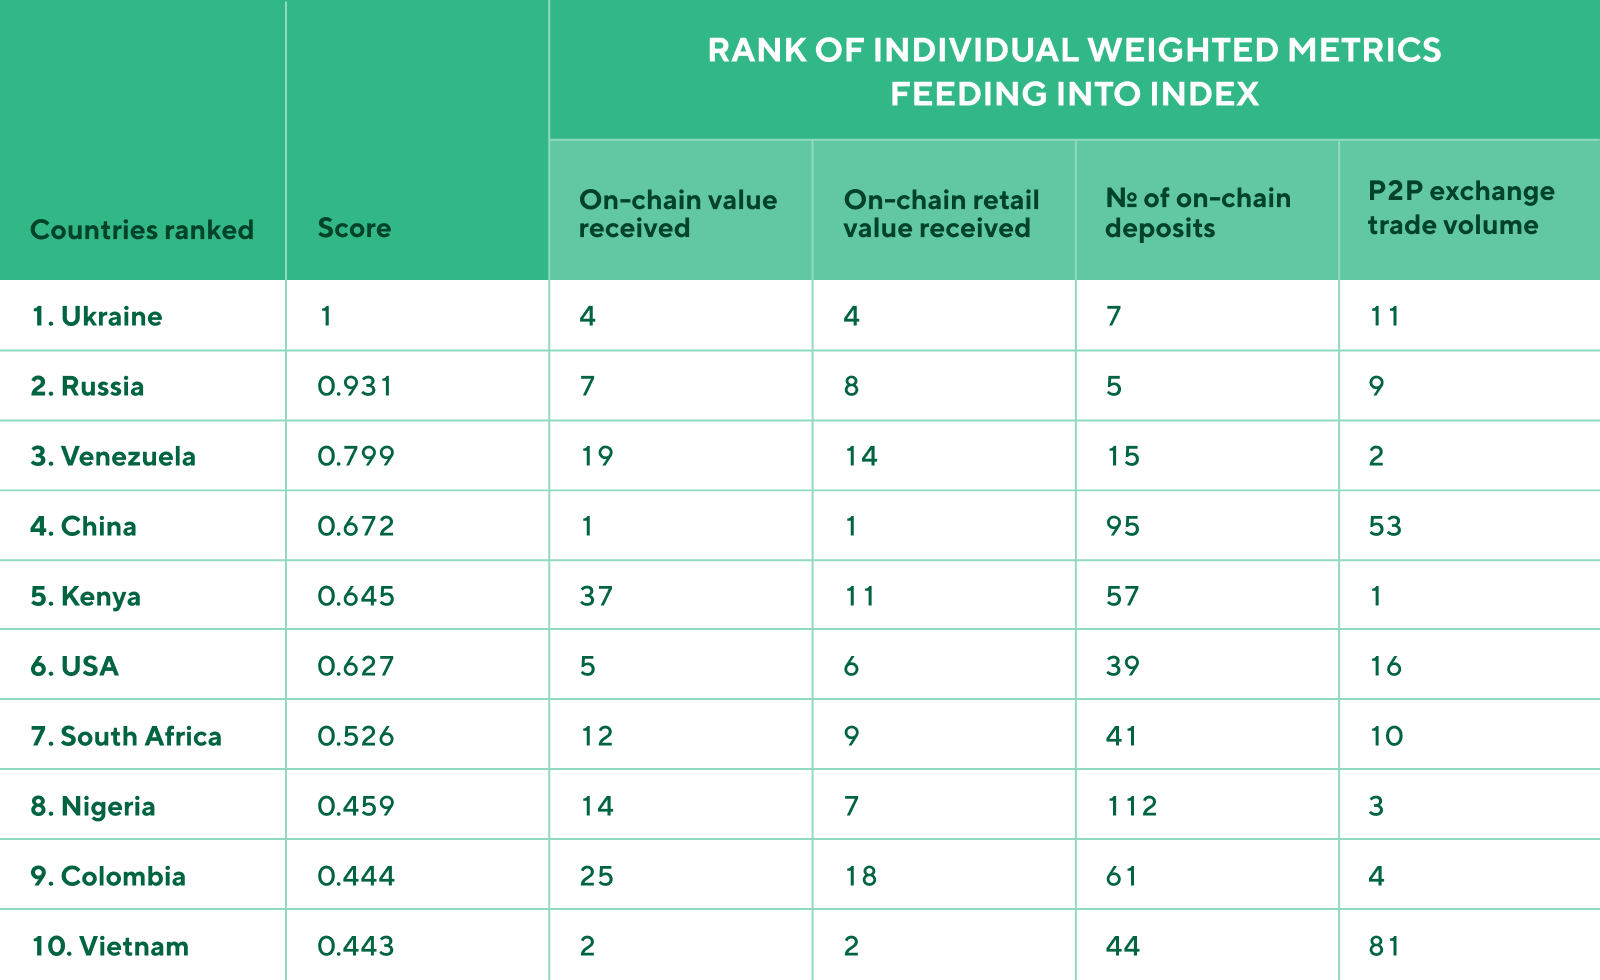 Rank of individual weighted metrics feeding into index table